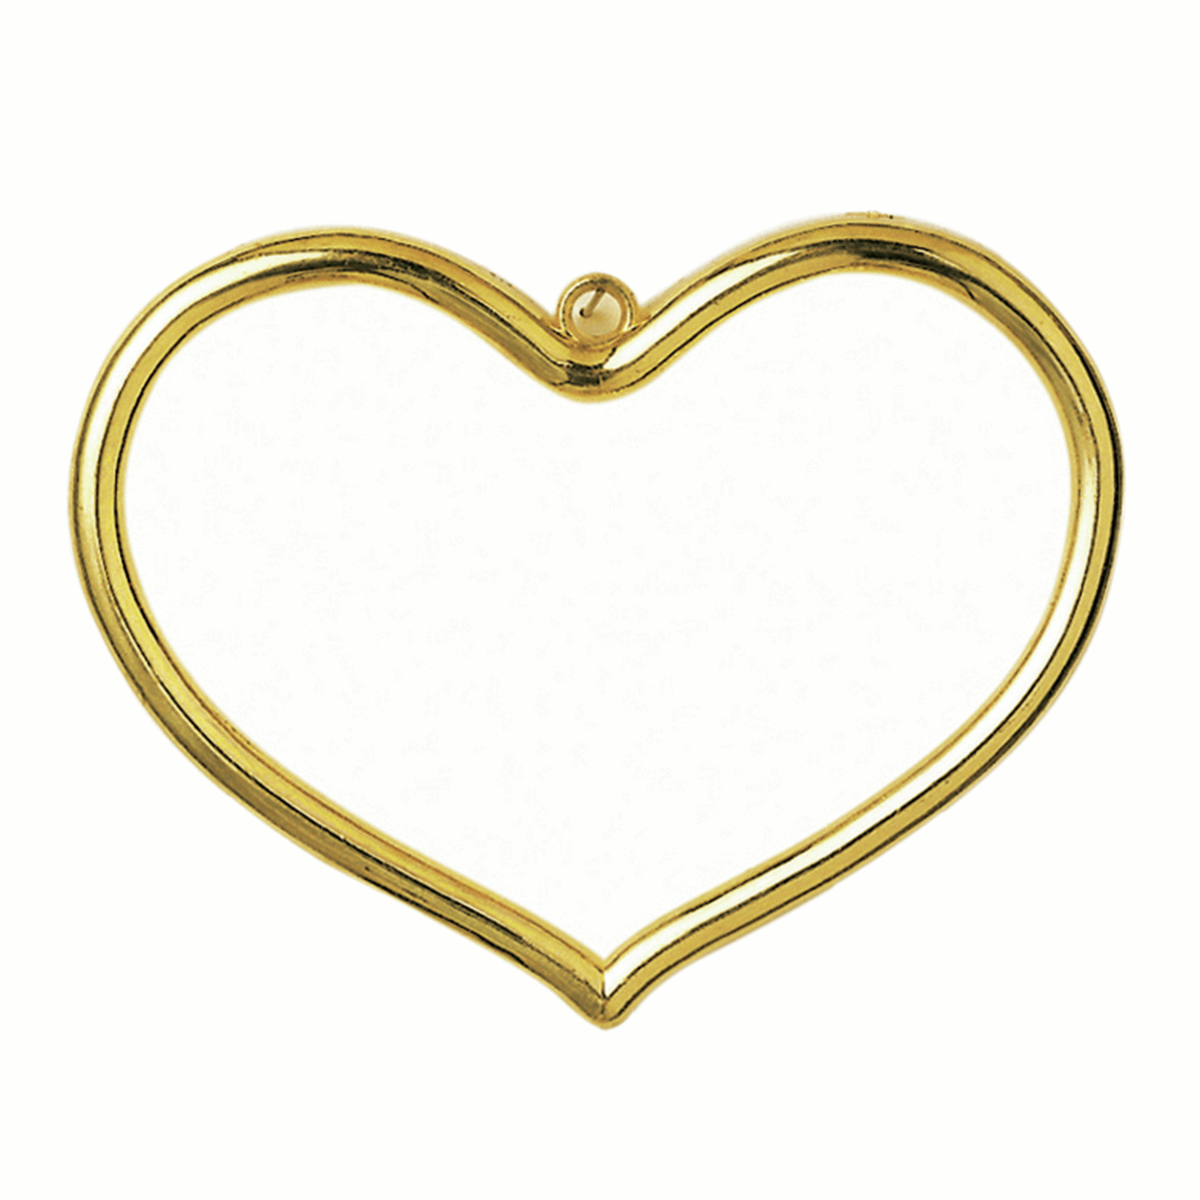 Vervaco Gold Heart Shaped Frame - 8 x 5cm